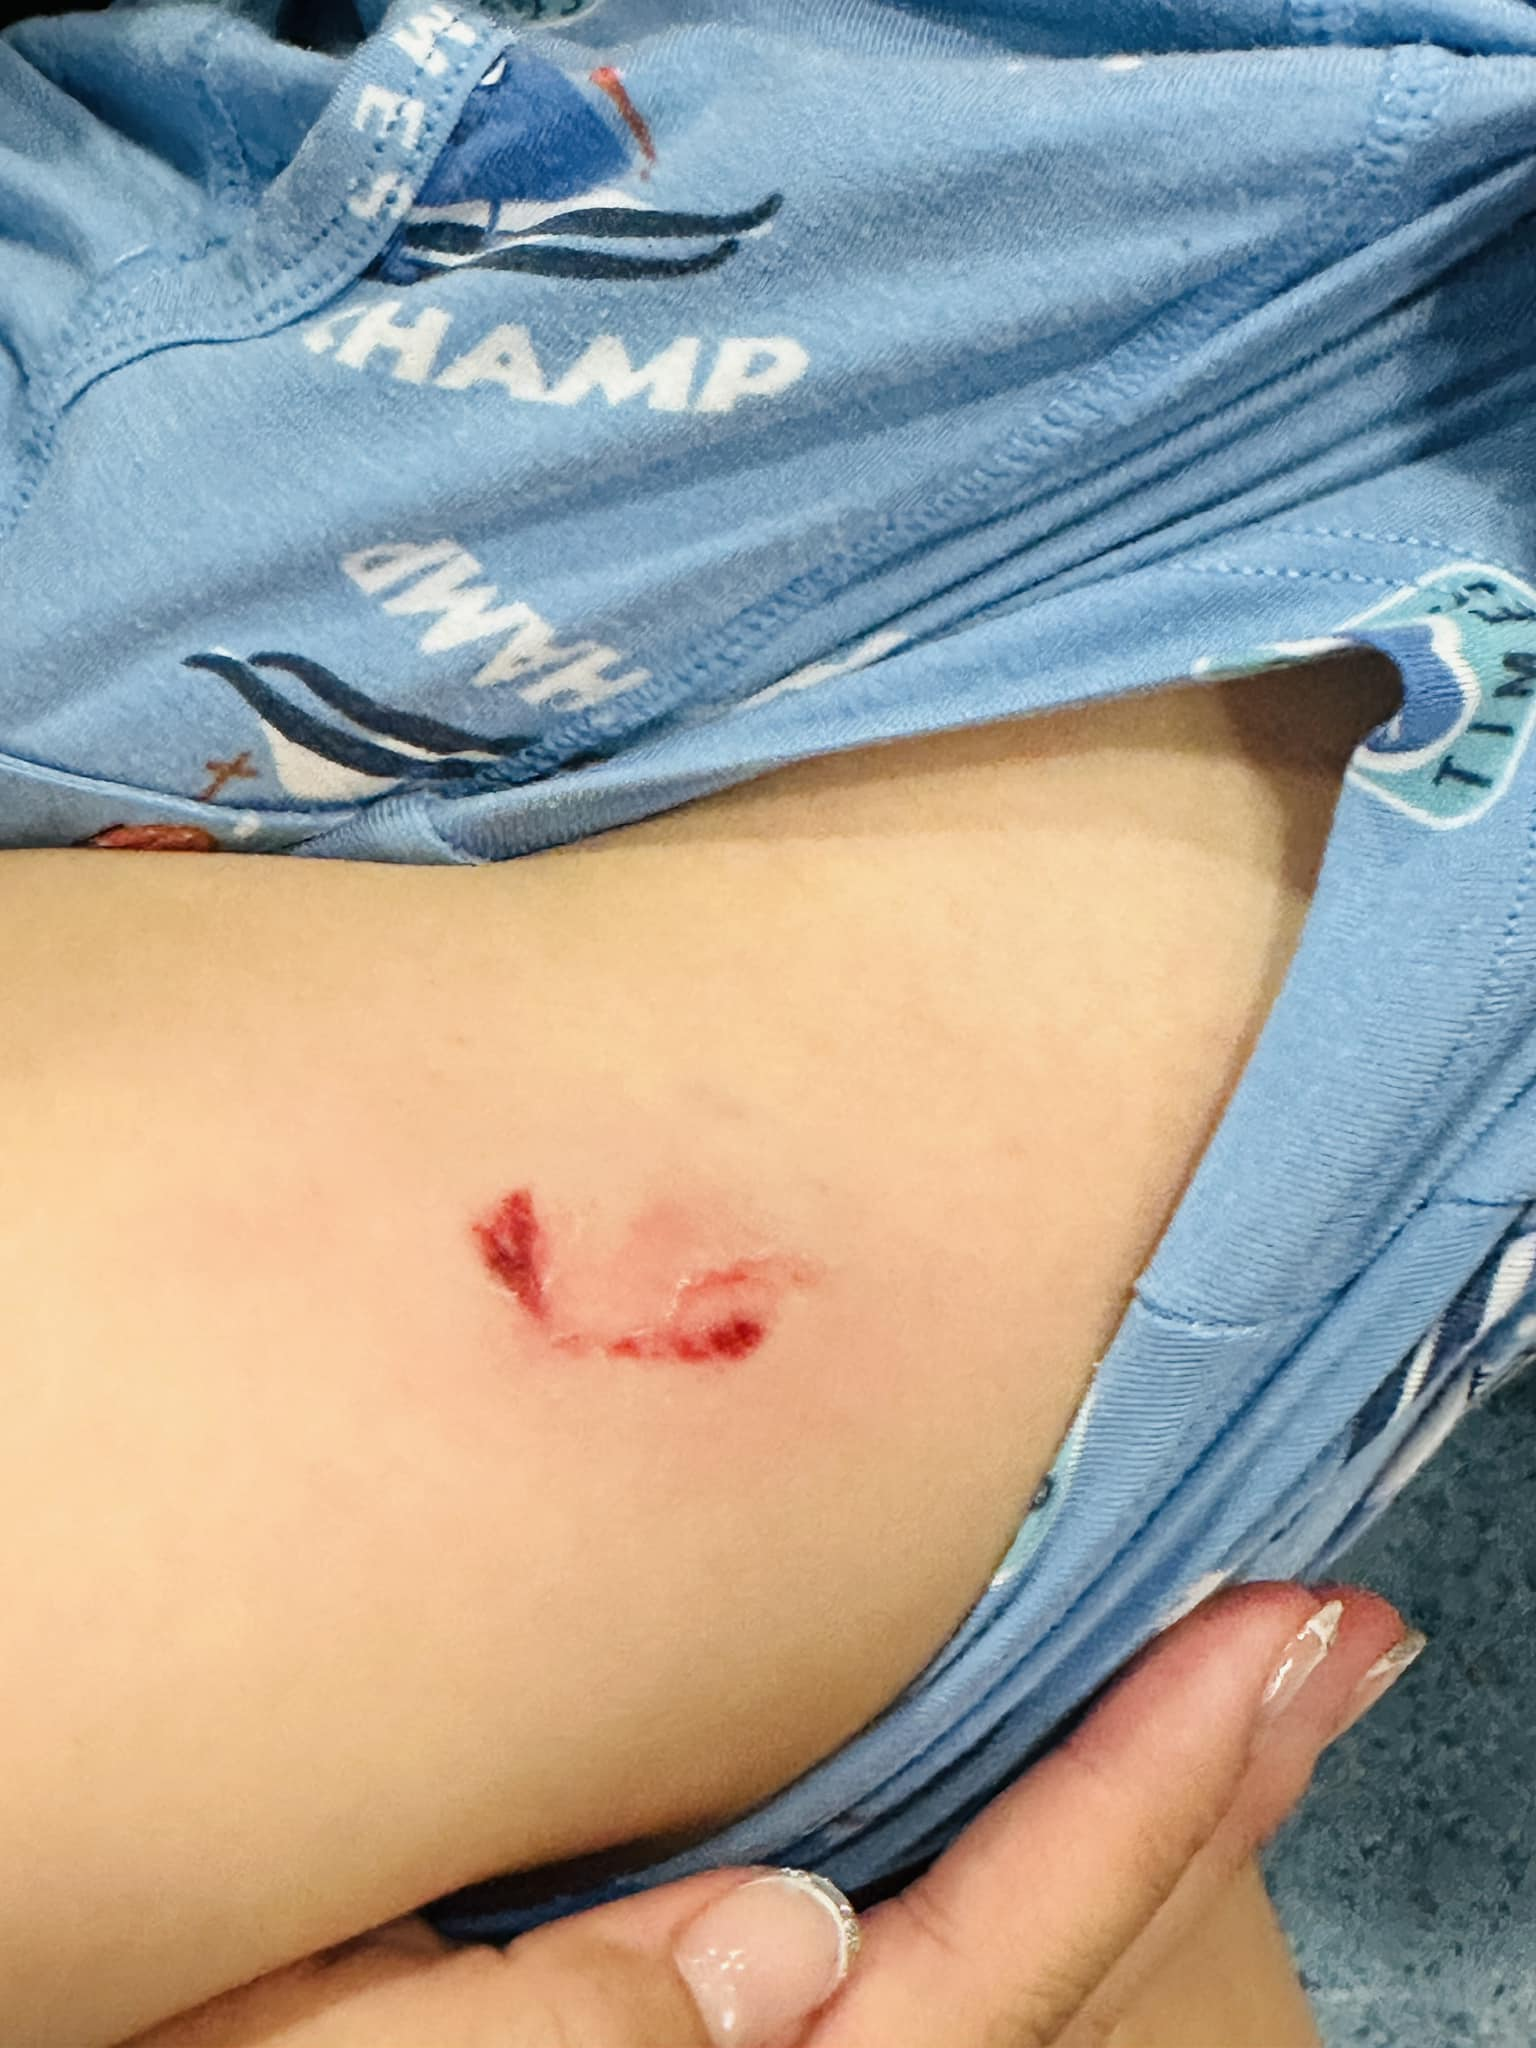 Bite marks left by dog who attacked 4yo boy at gardens by the bay